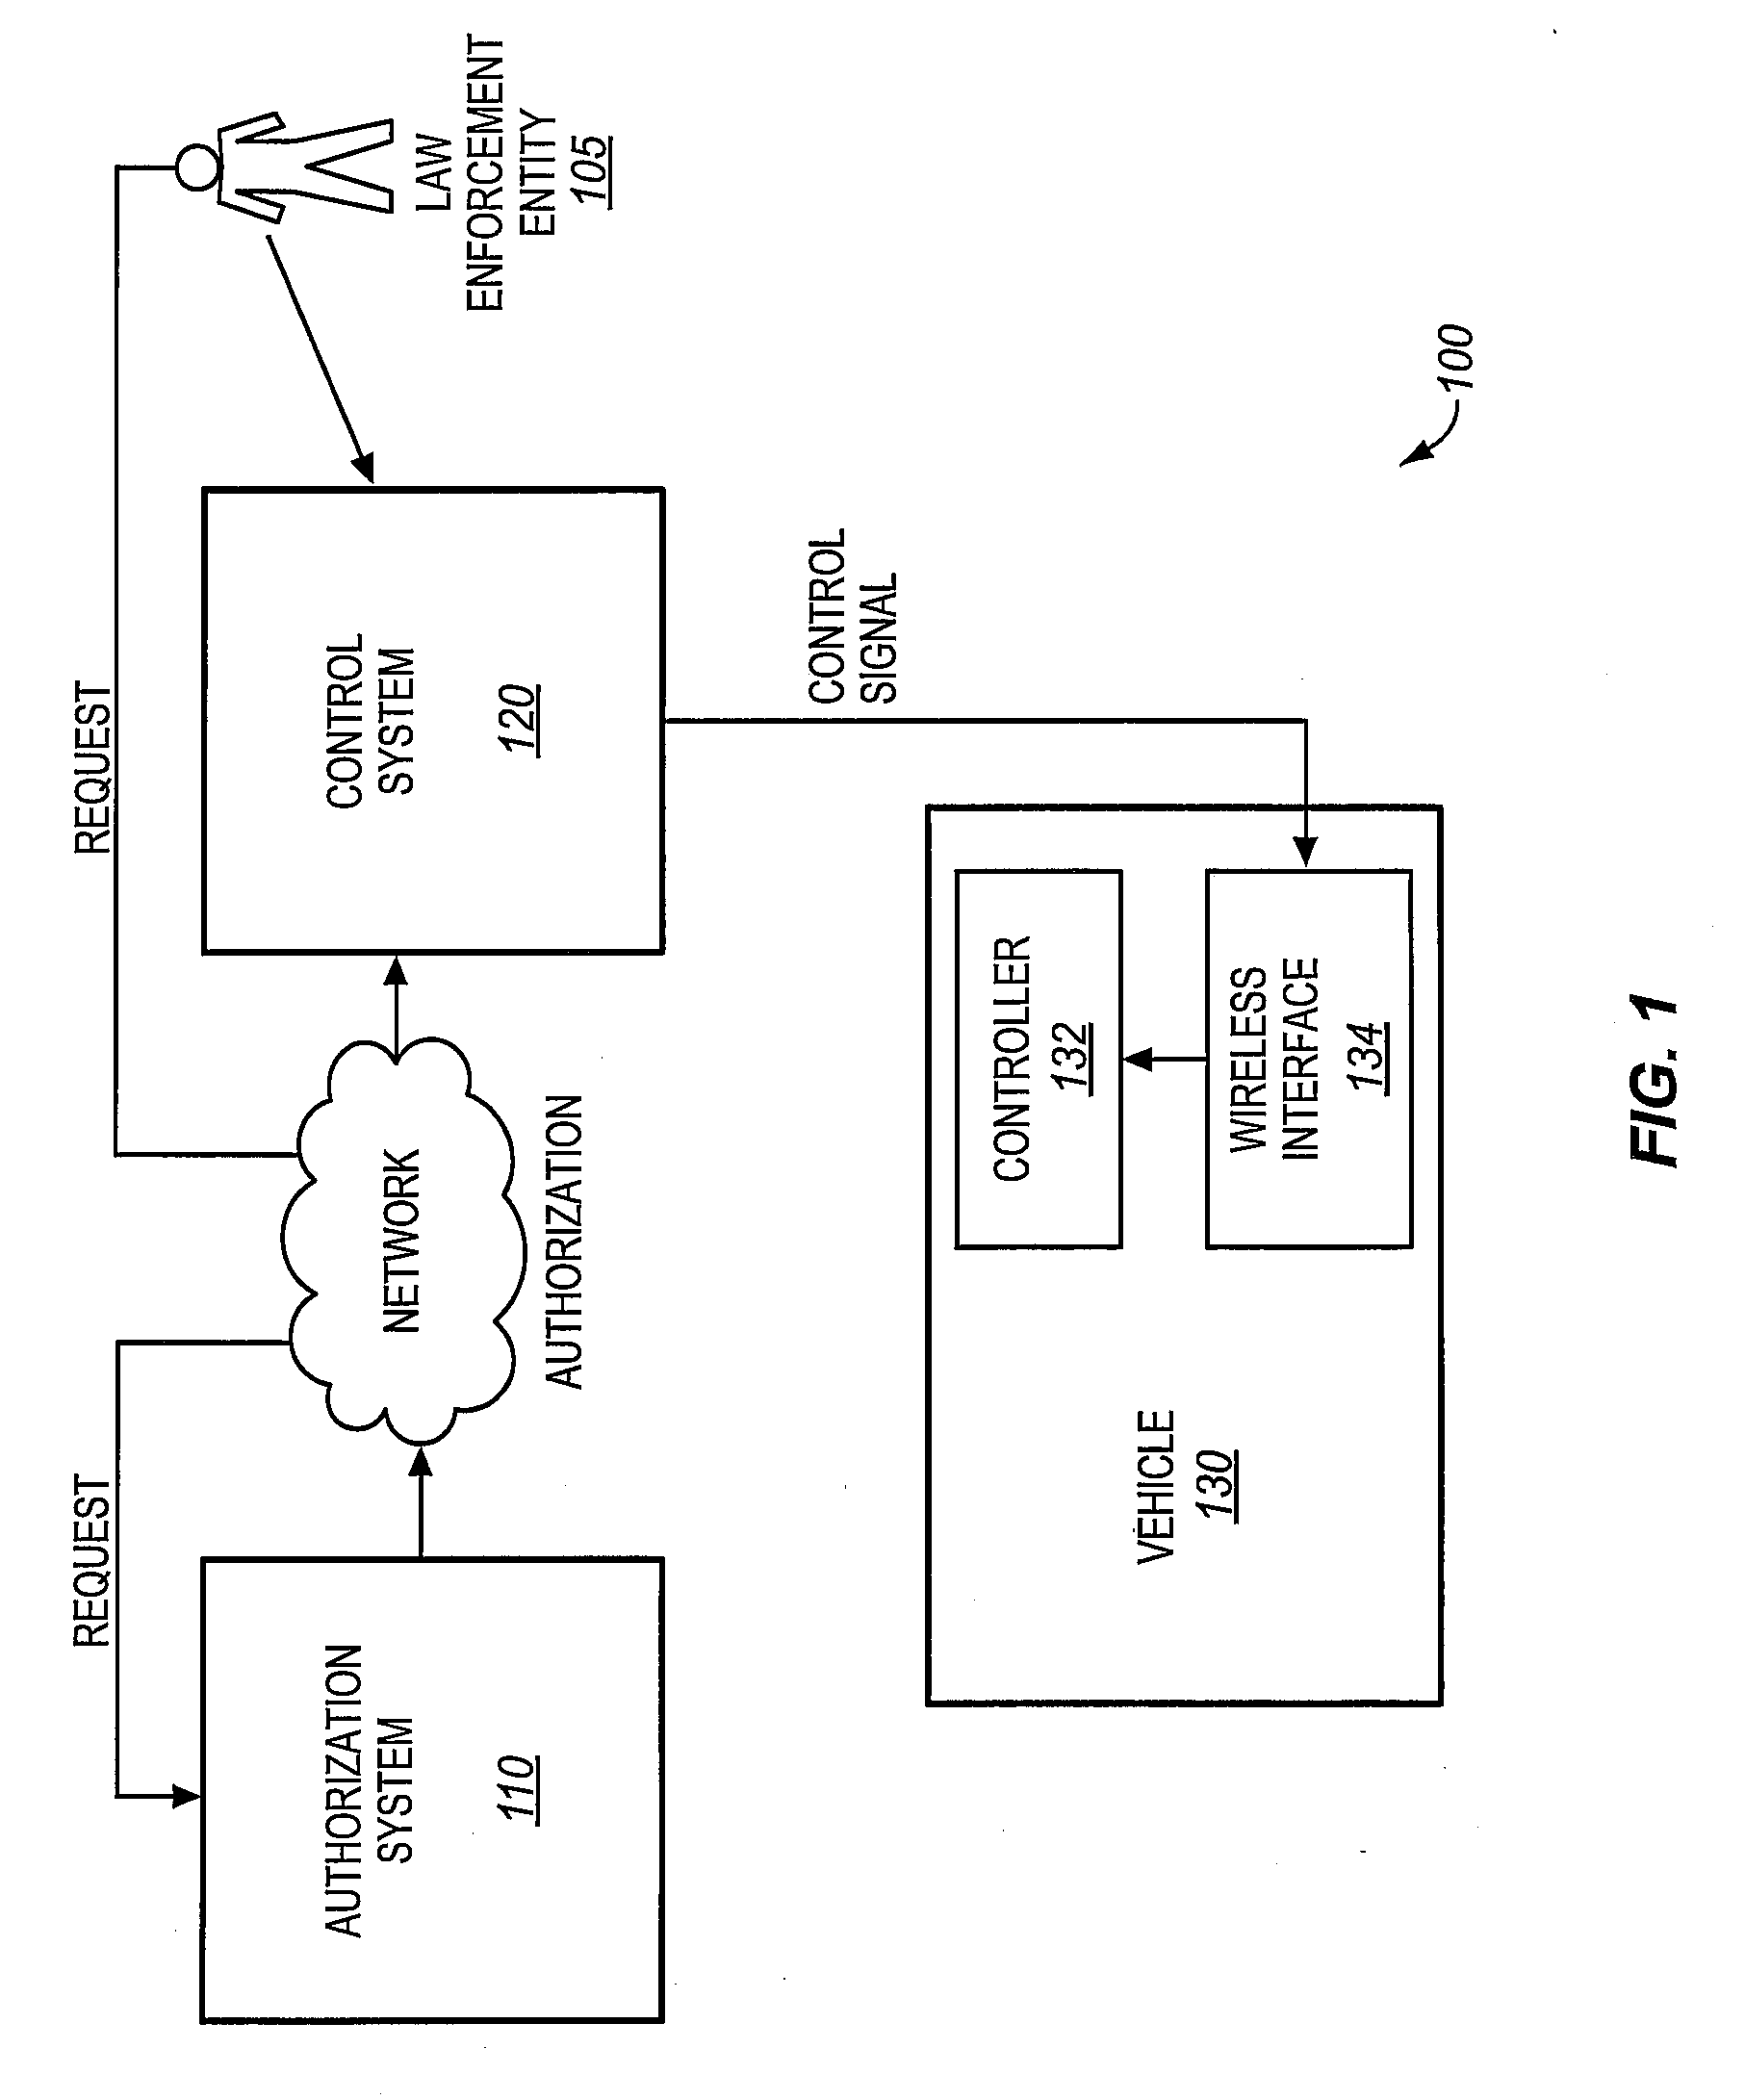 Methods and systems for remotely controlling a vehicle